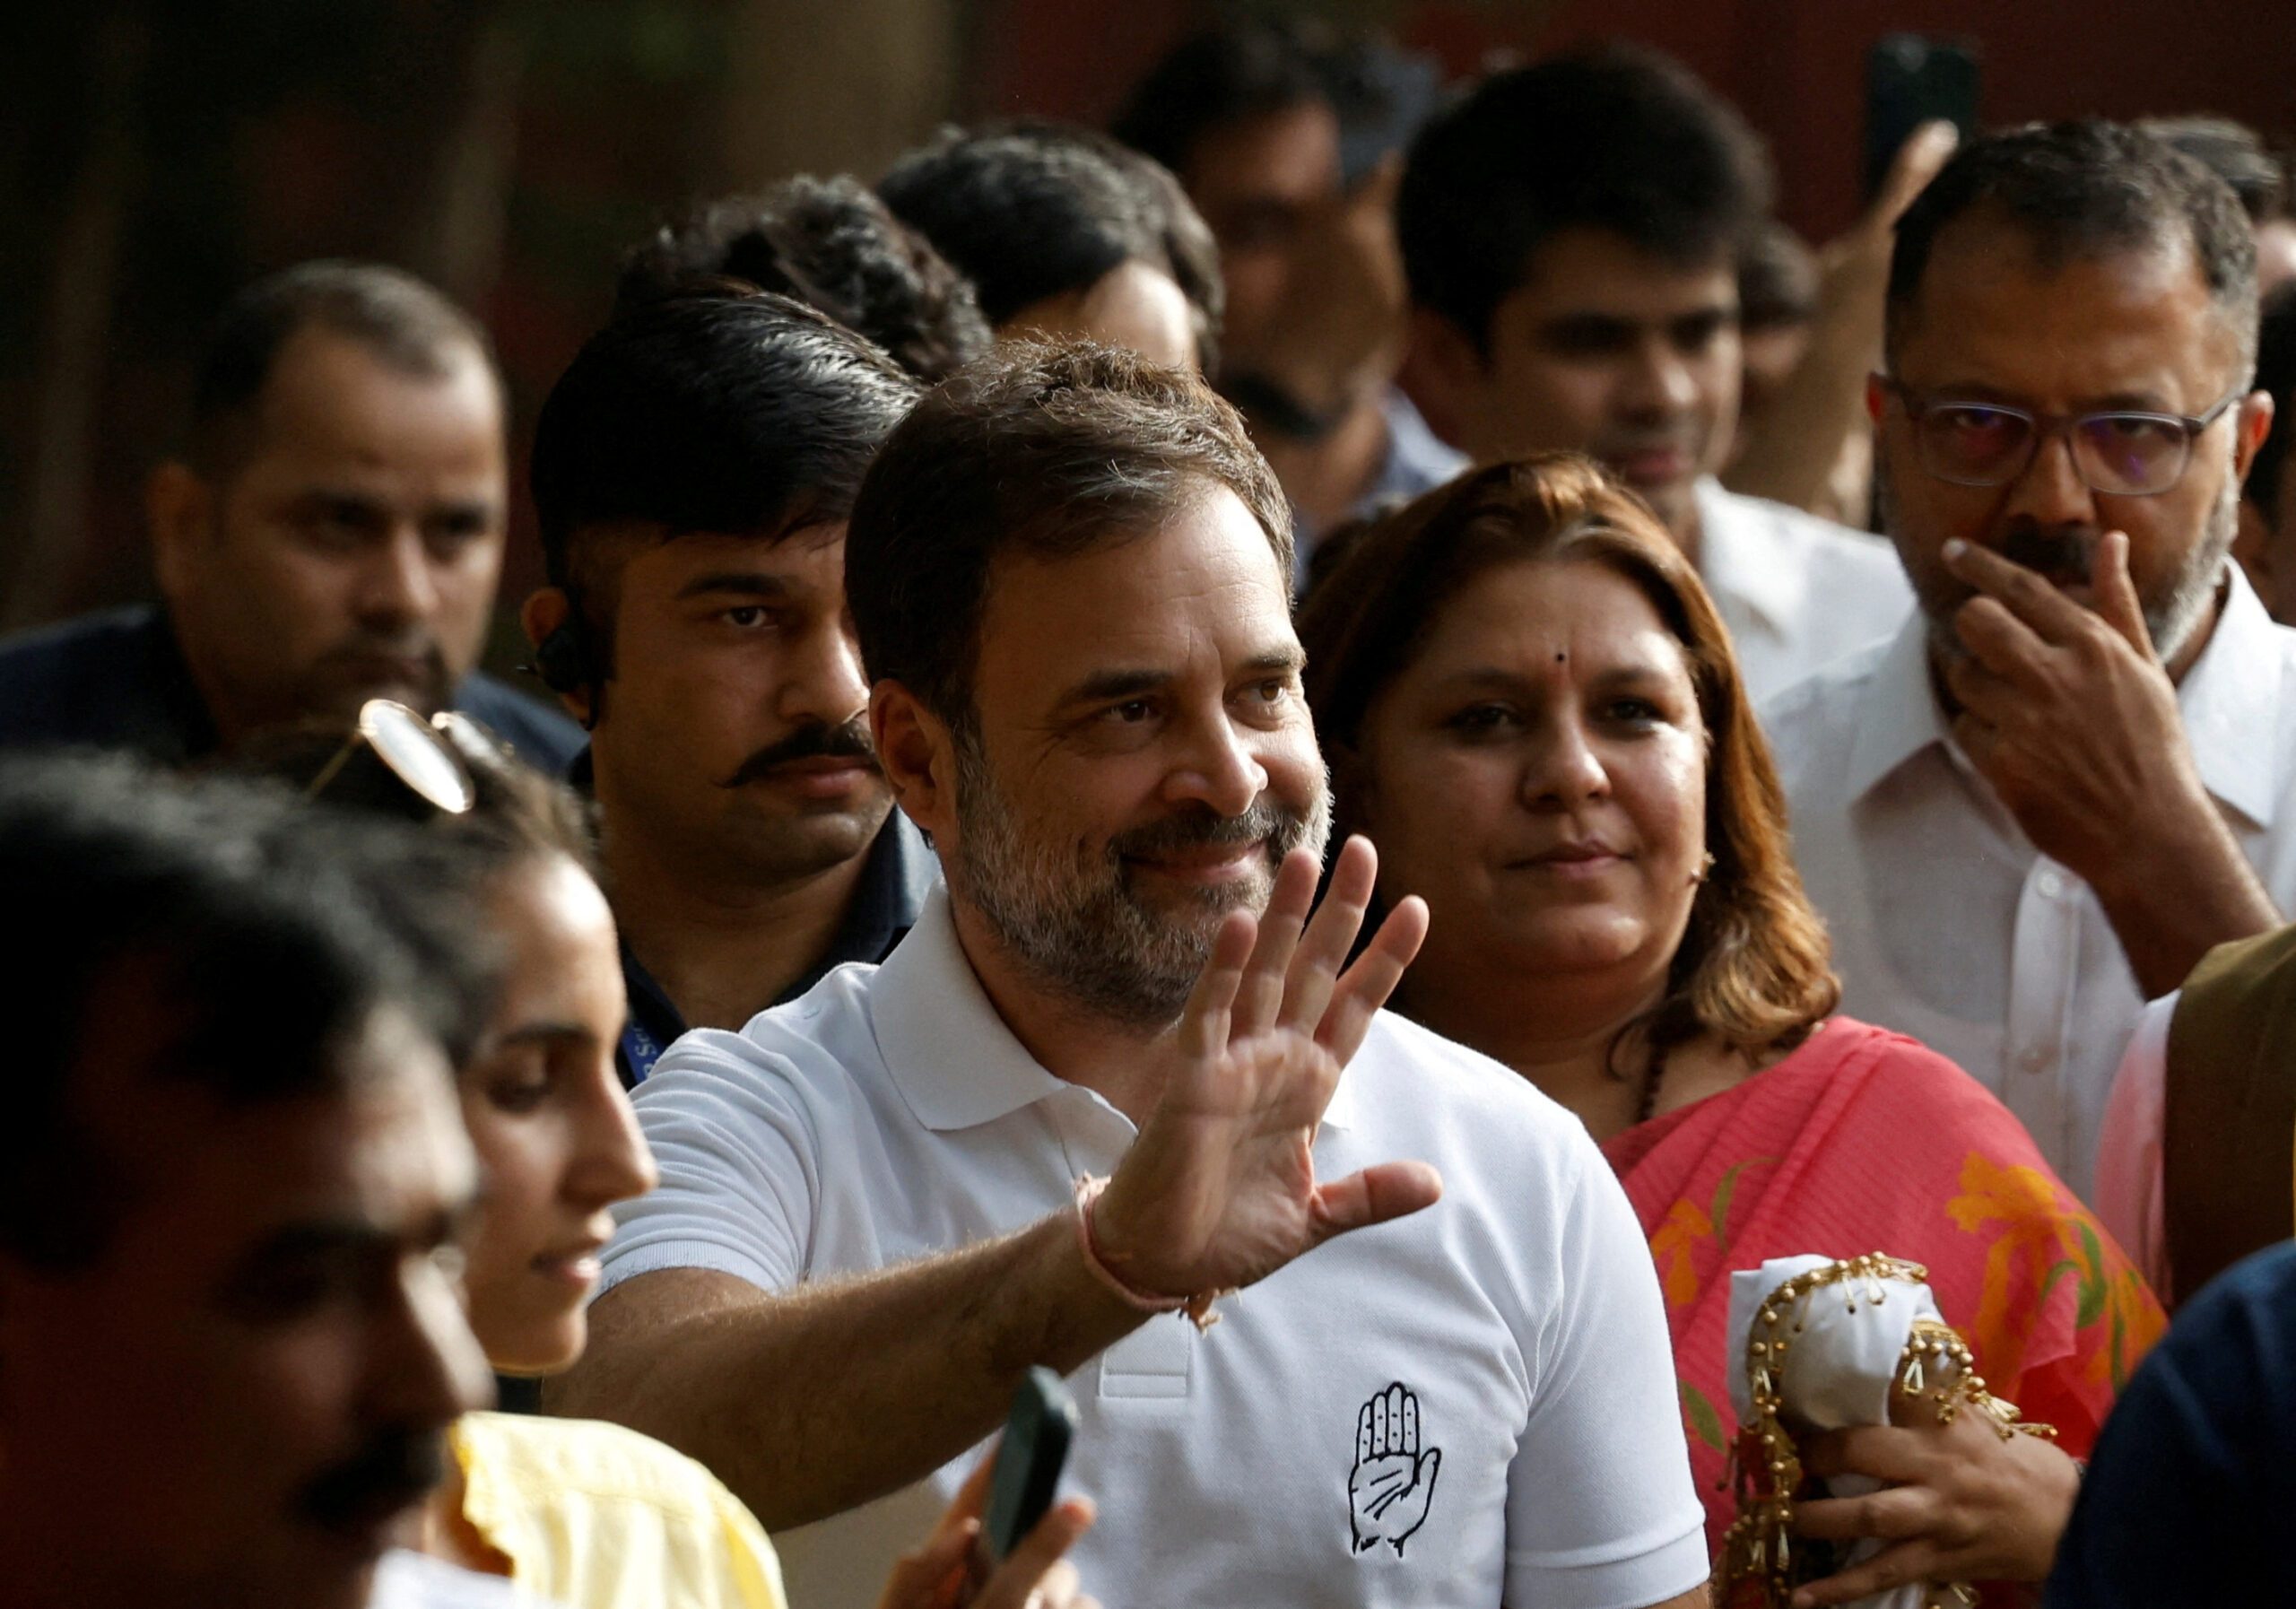 The Congress Party's Rahul Gandhi waves to supporters at its HQ in New Delhi. His opposition alliance has made big gains